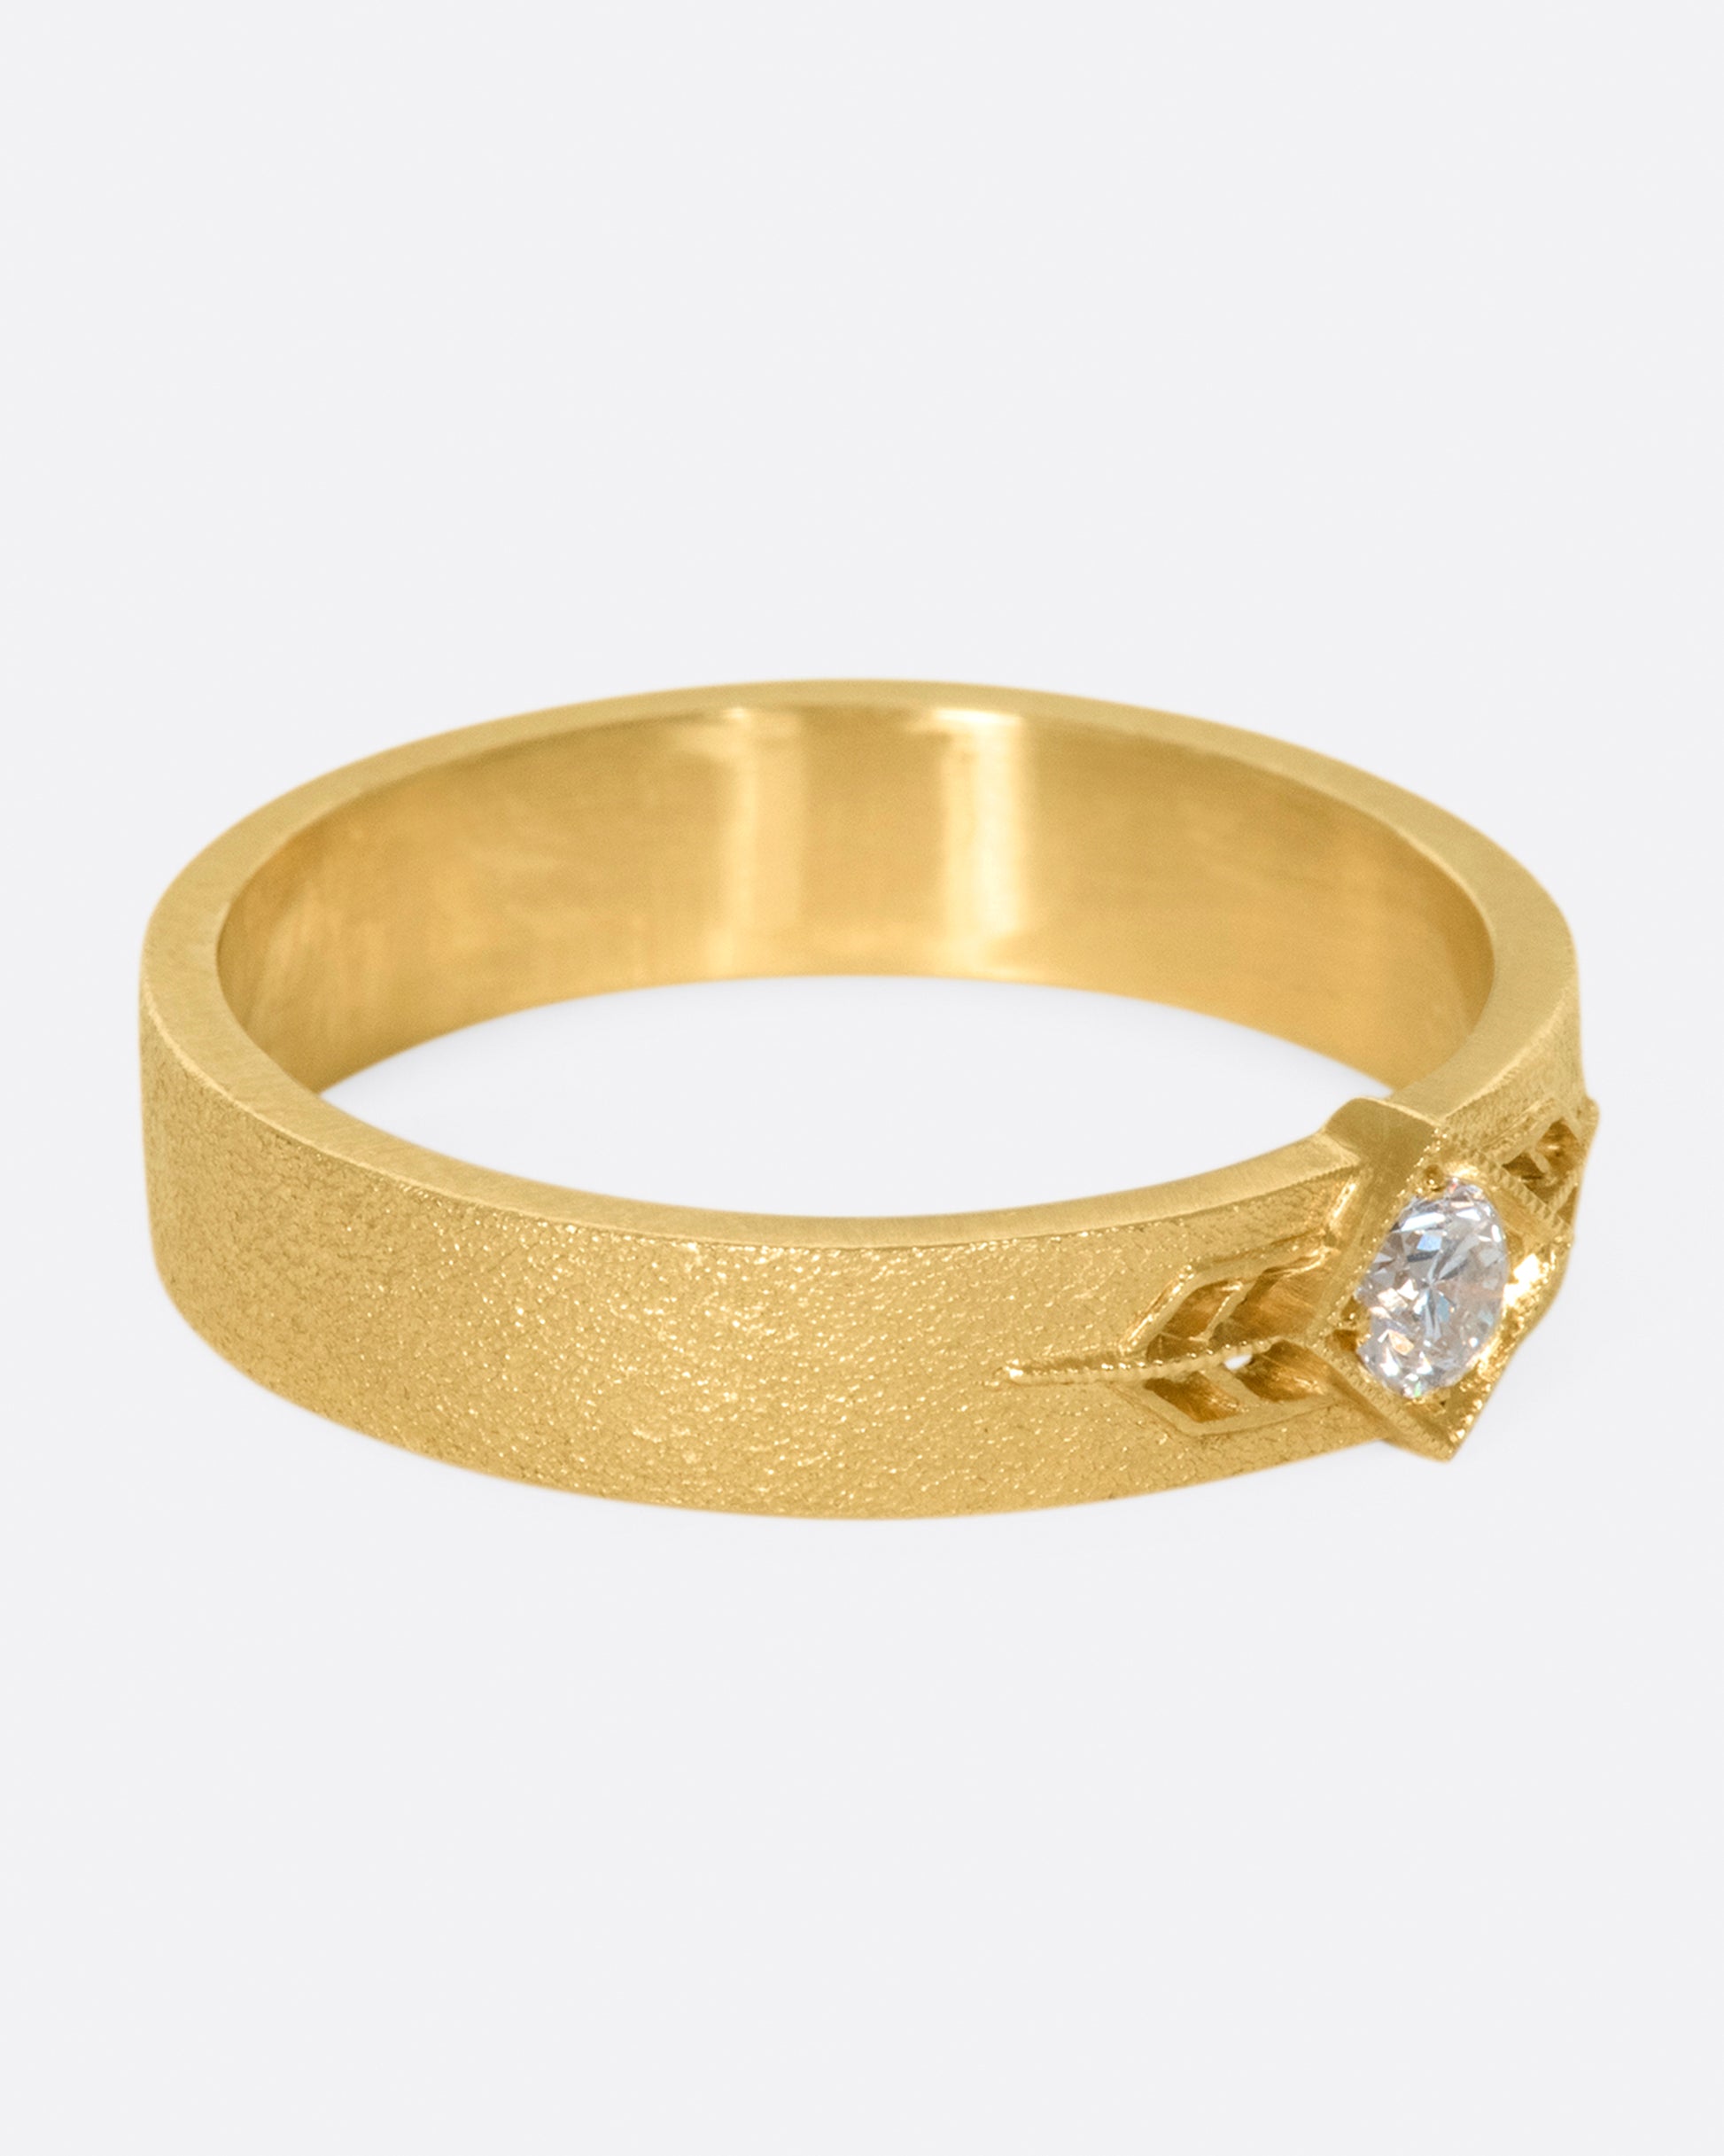 This 14k gold band has a stipple textured finish and an extremely sparkly, high-quality diamond popping in the center